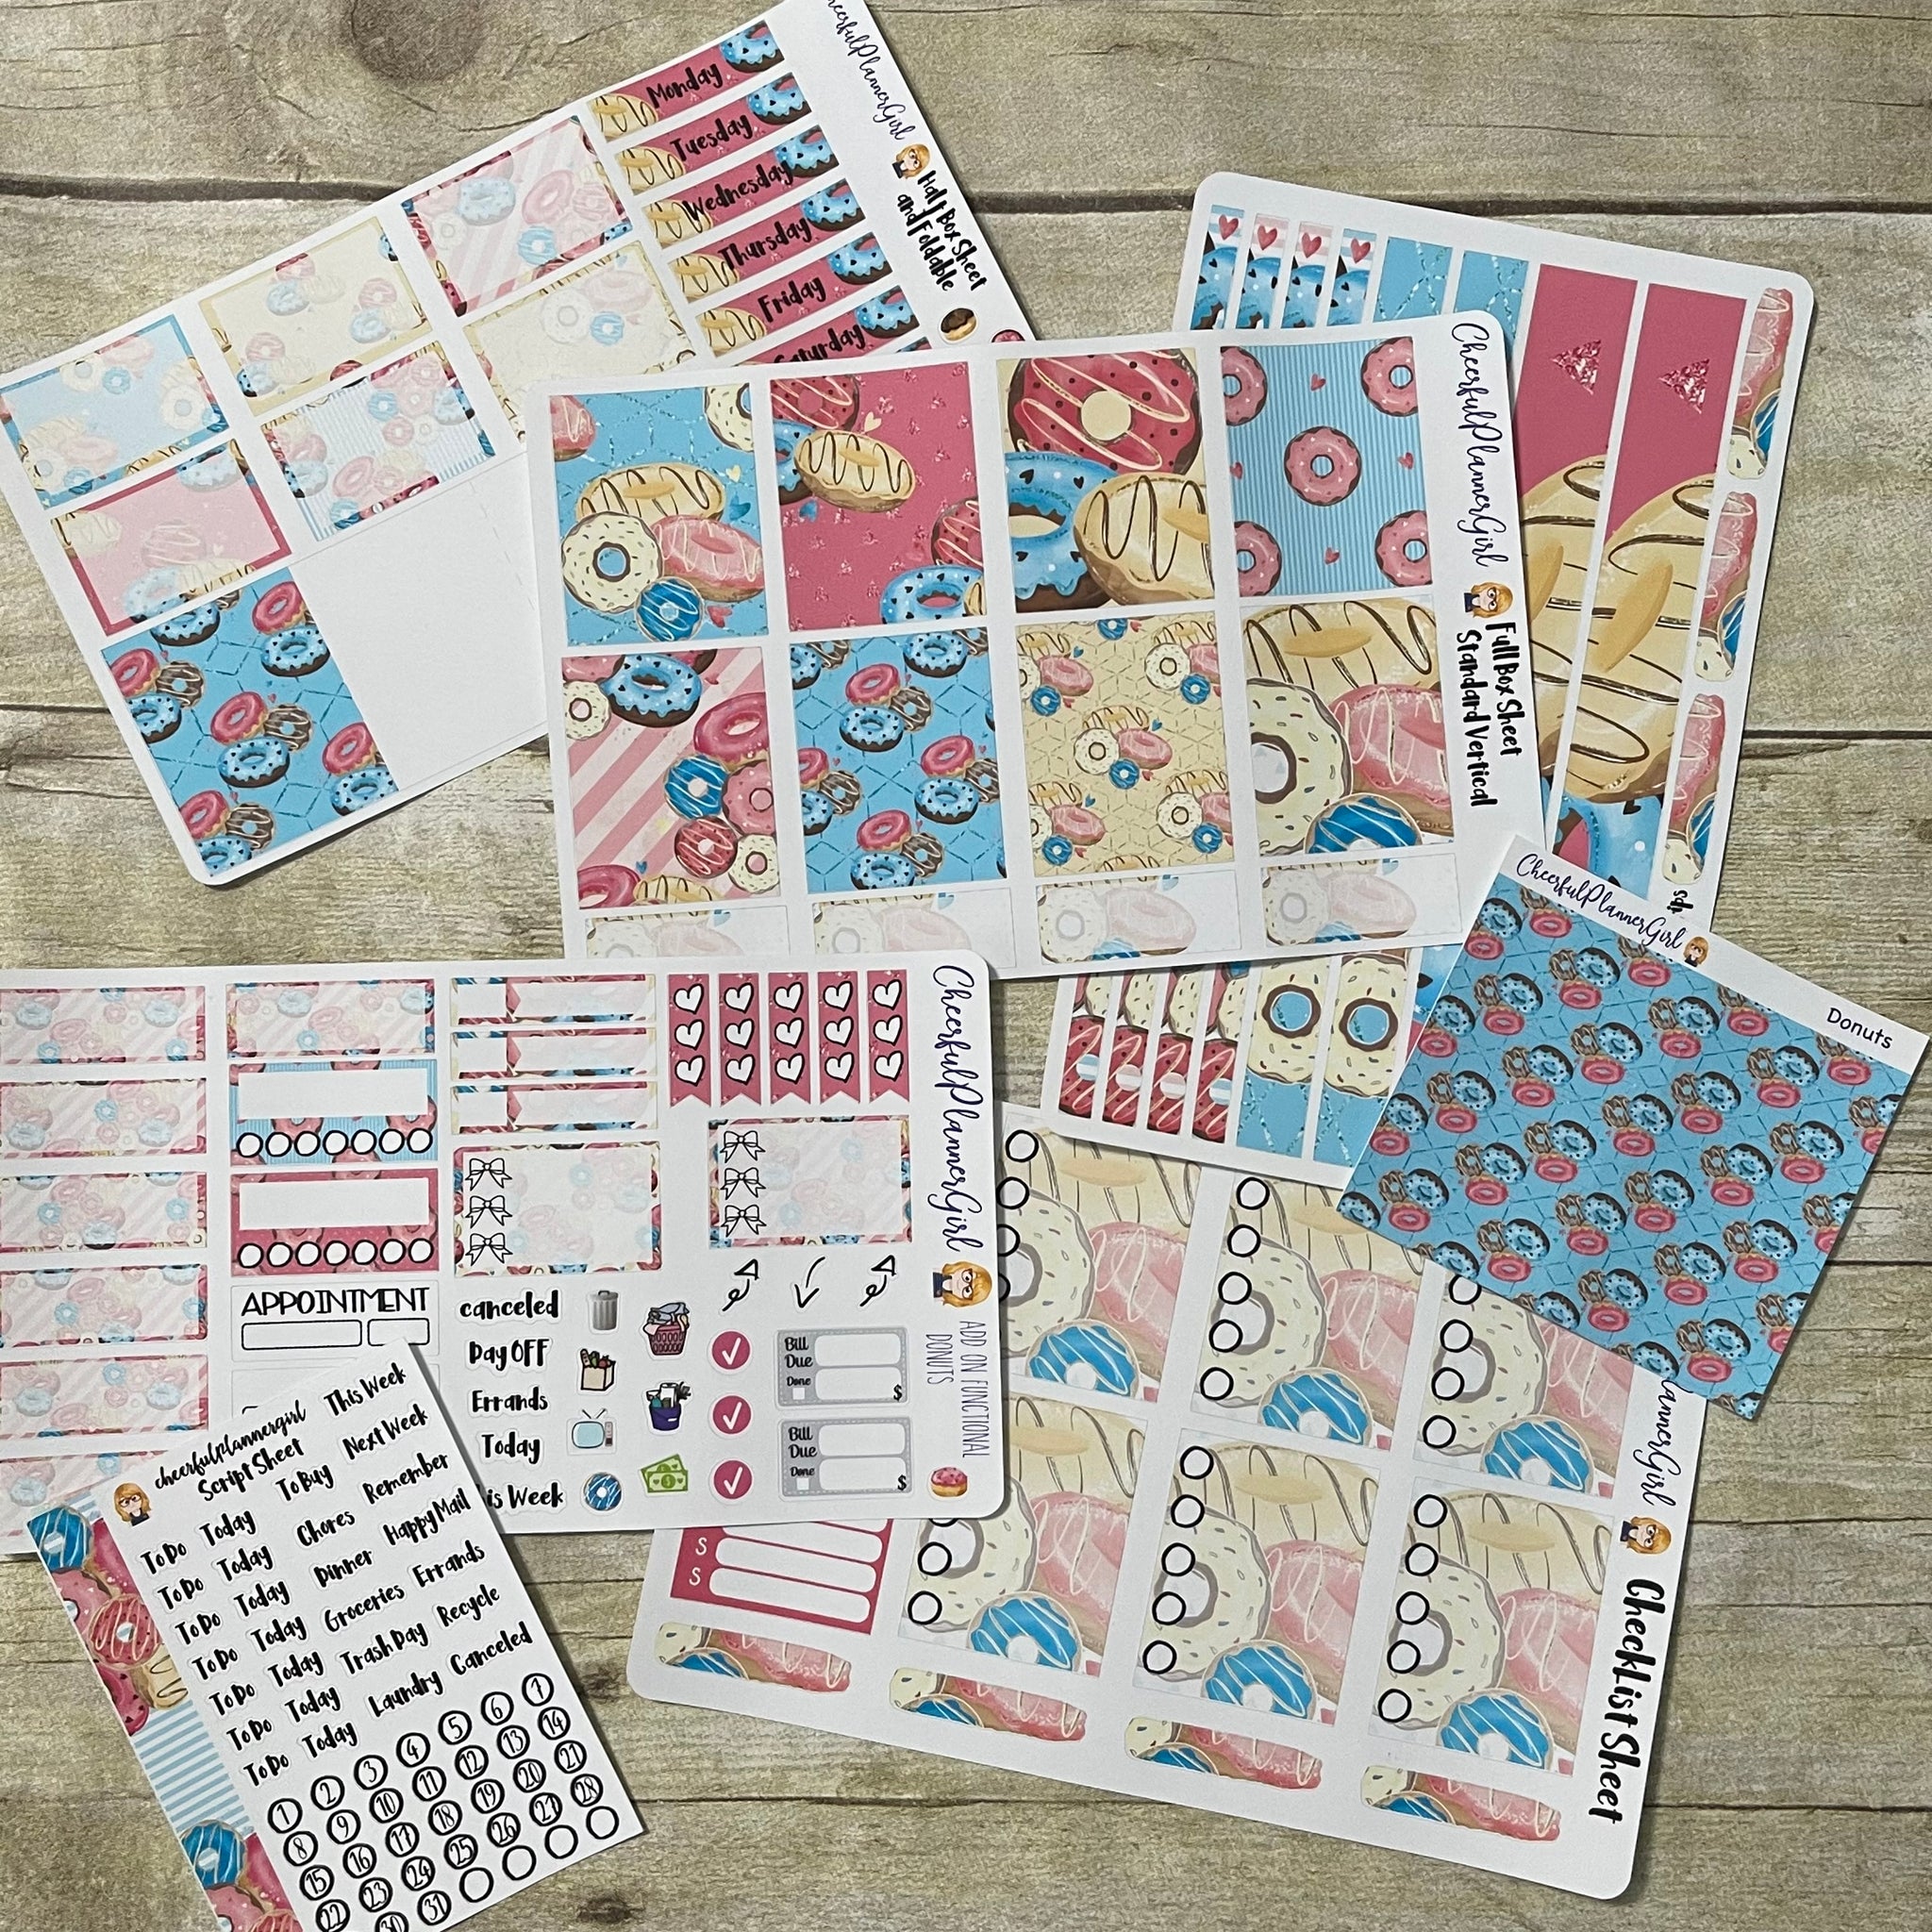 All the Donuts Standard Vertical Full Kit Weekly Layout Planner Stickers Doughnuts Bakery